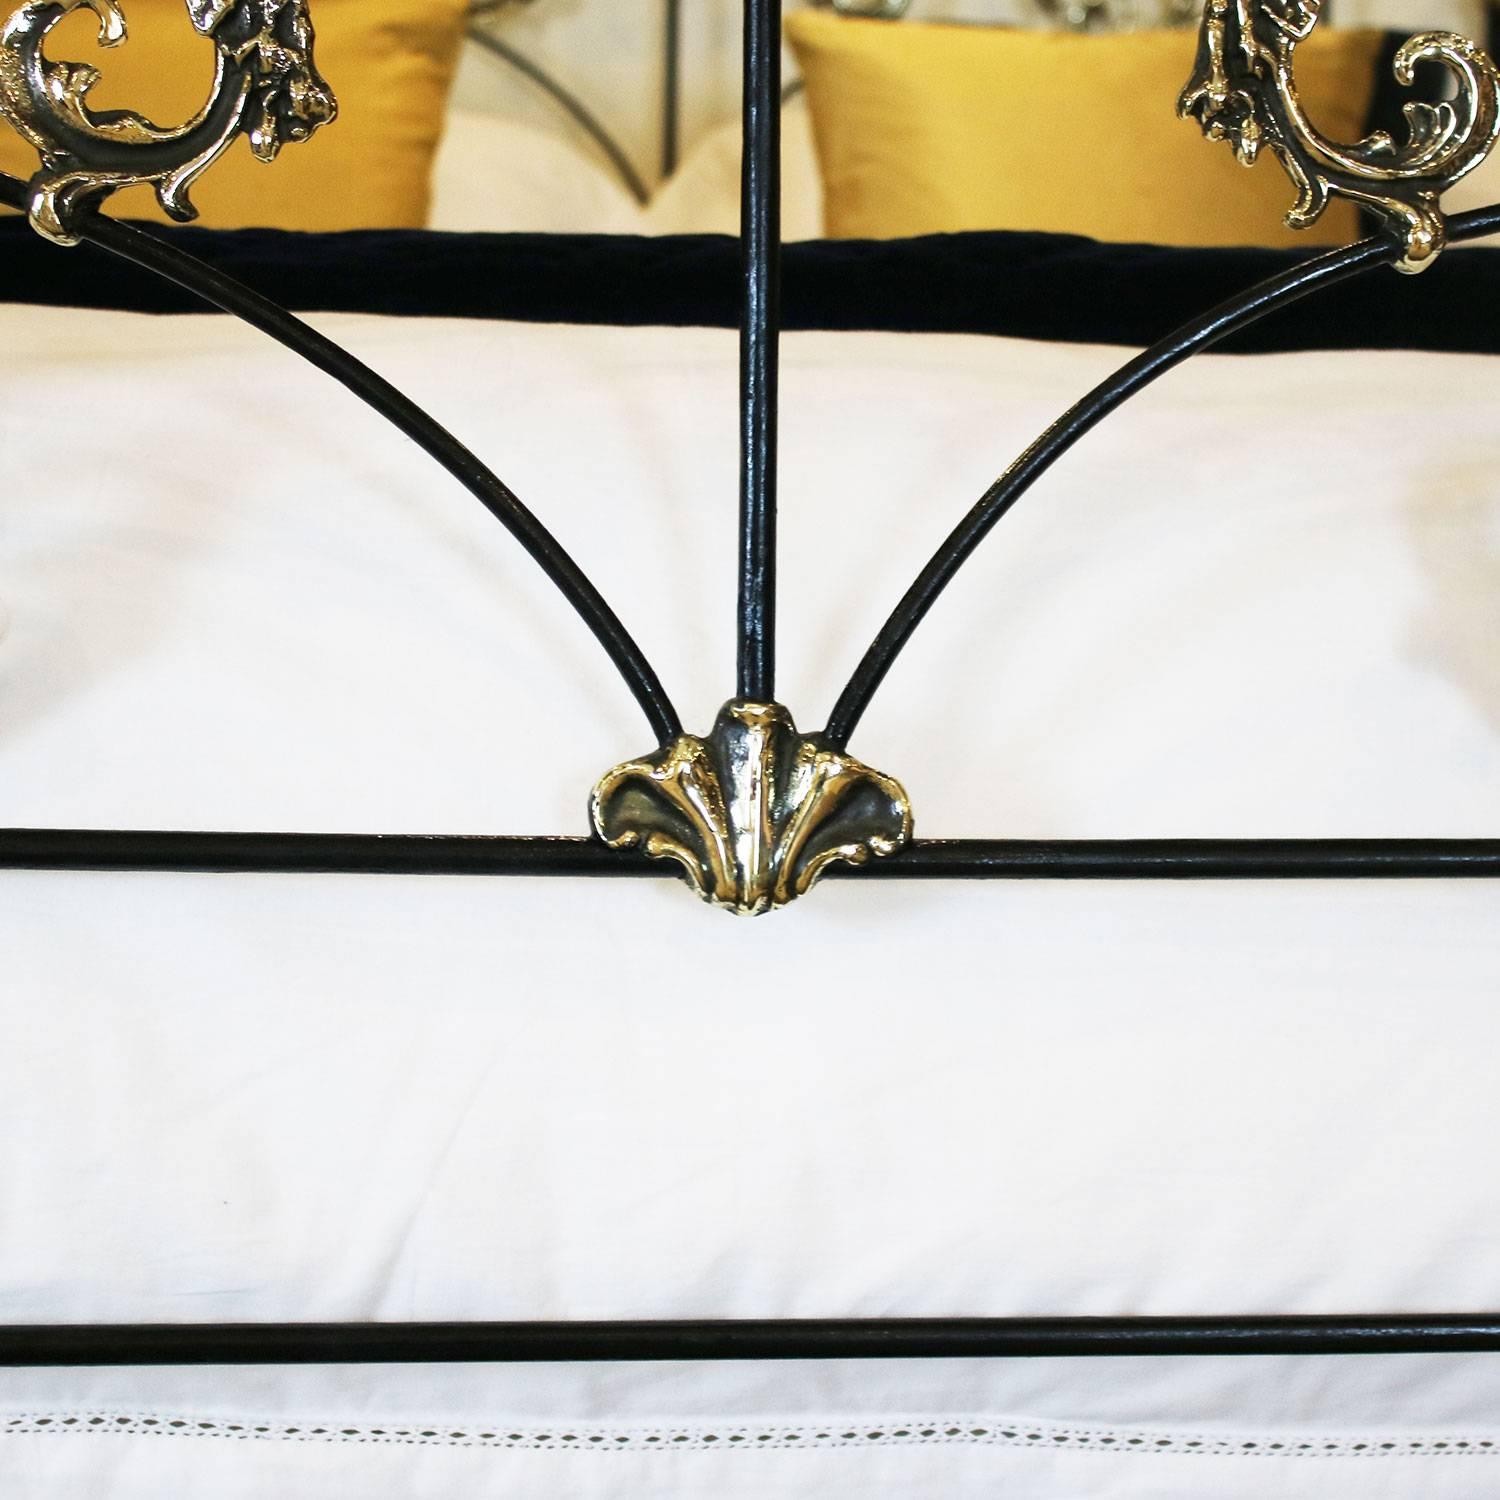 Bespoke Brass and Iron Tangier Bed For Sale 1